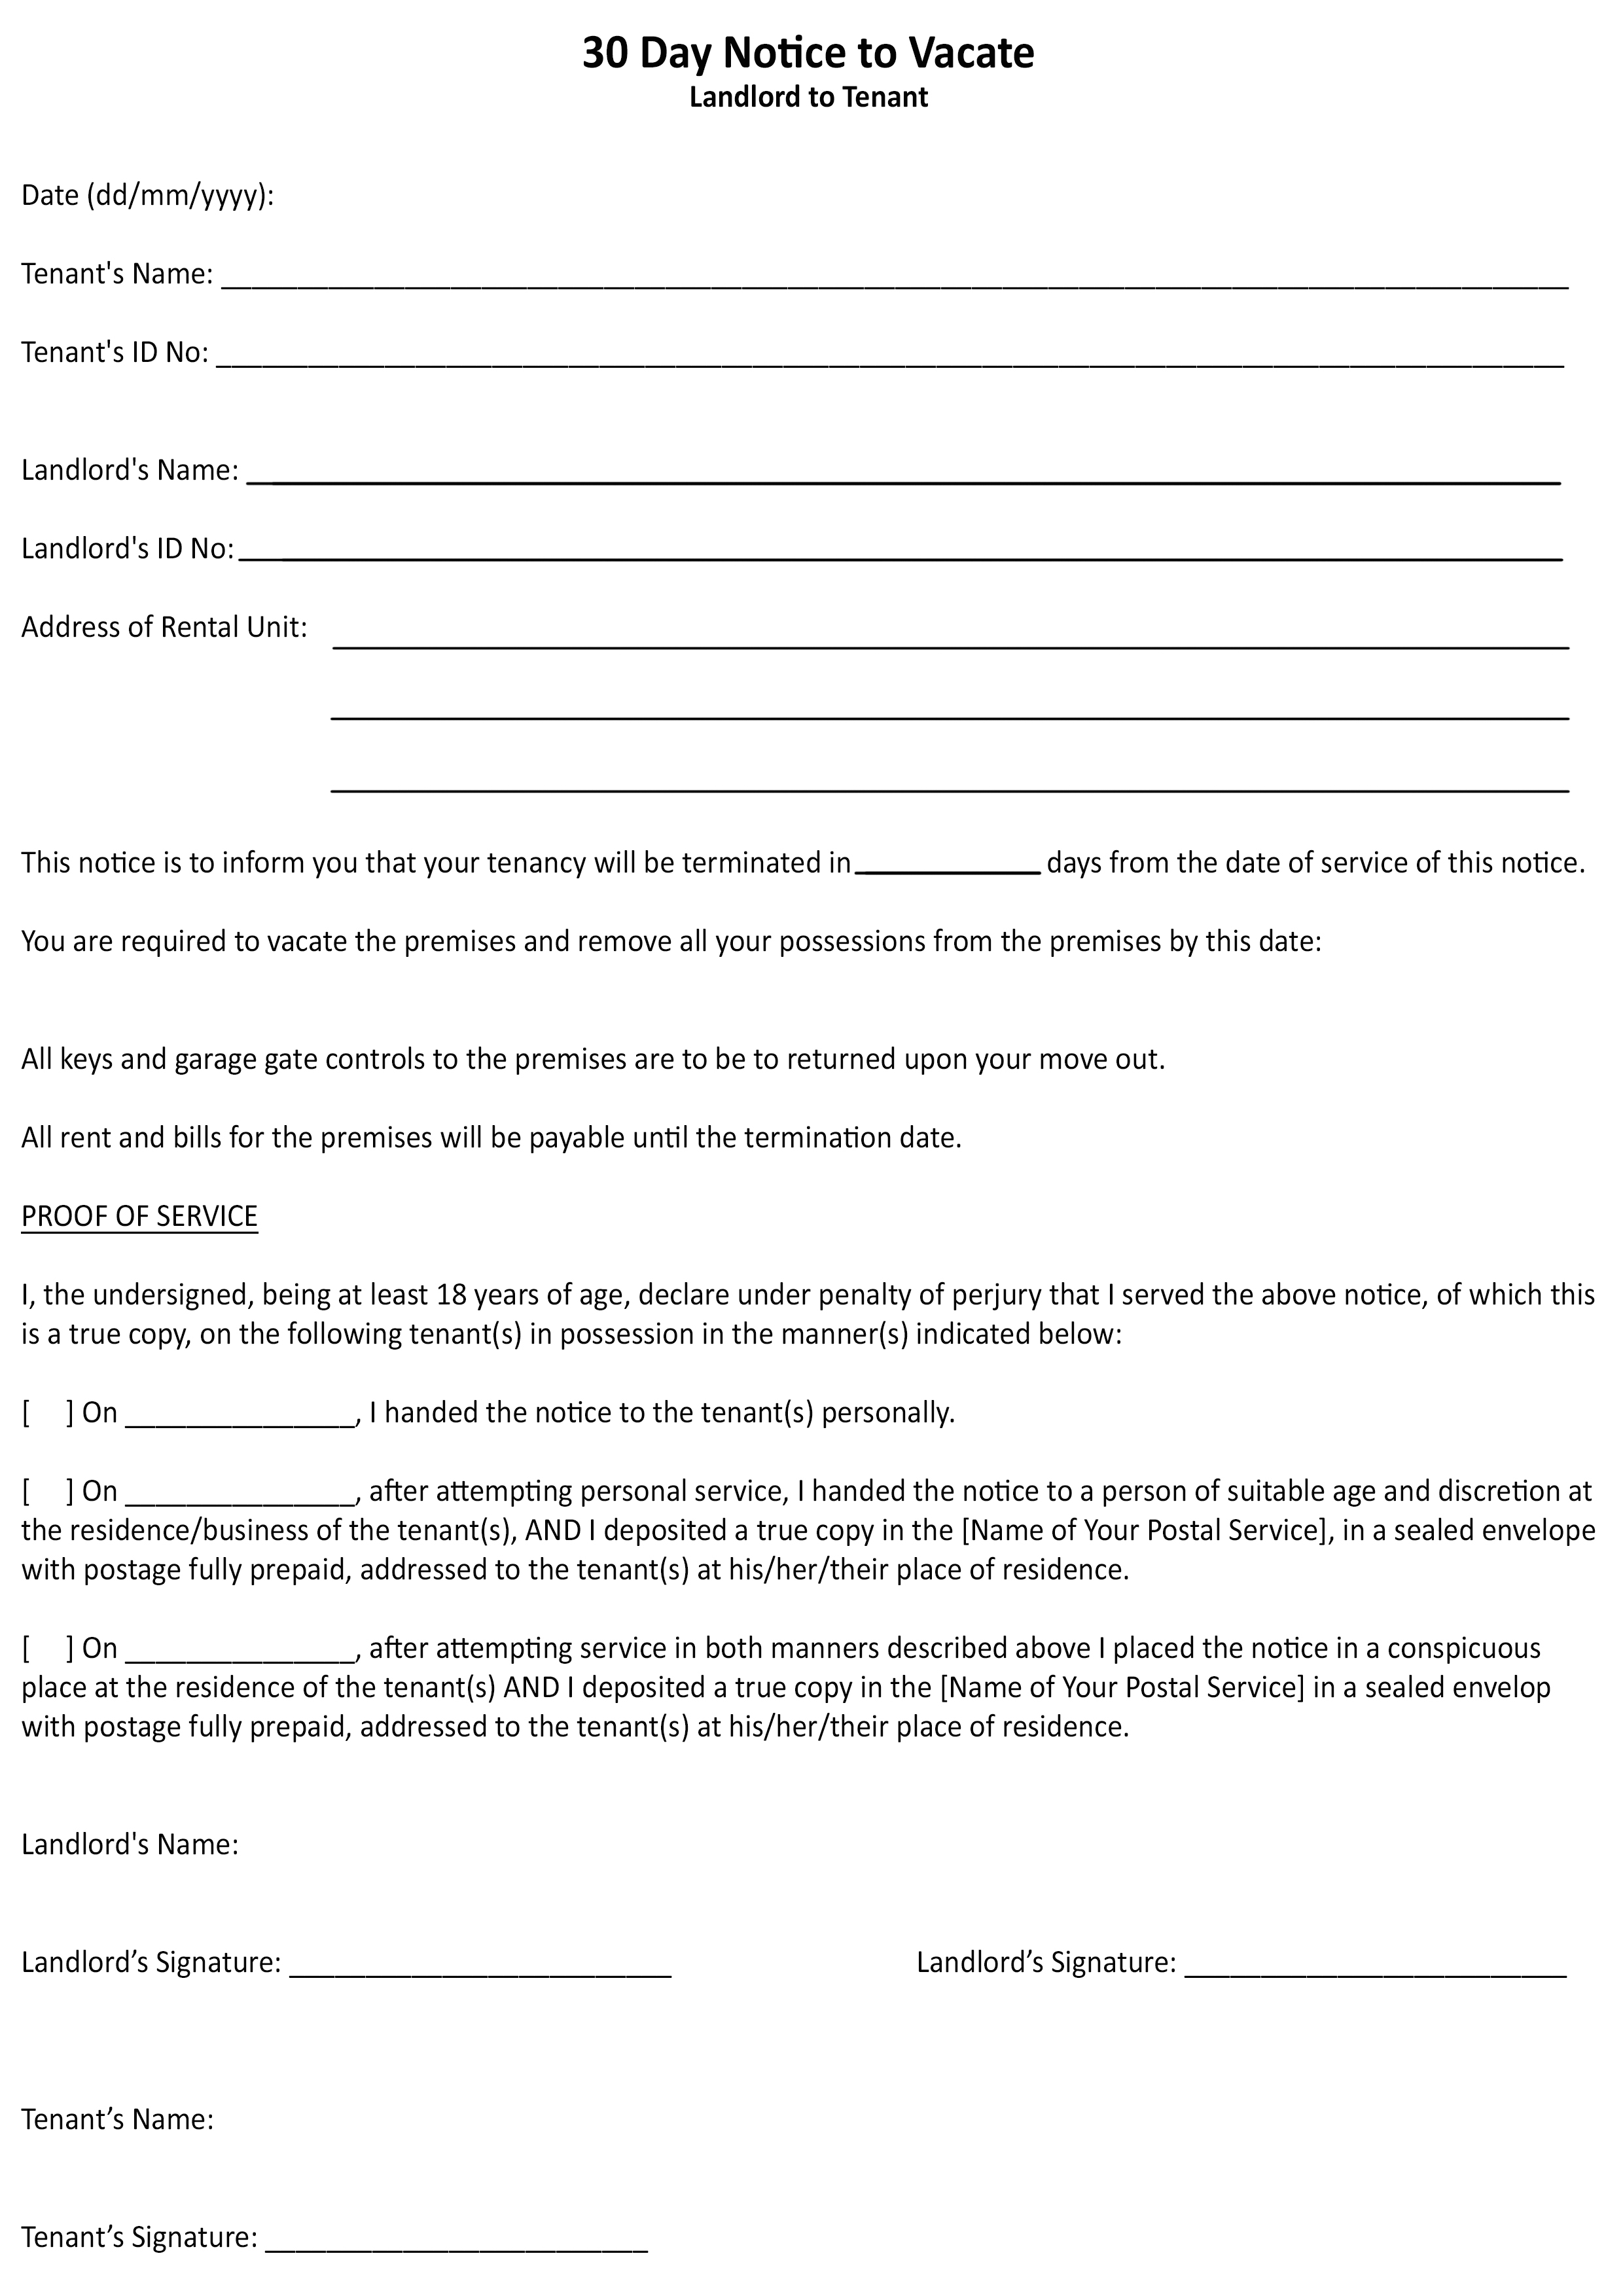 Residential Lease Agreement Doc How To End Your Lease Agreement Mafadi Property Management Company